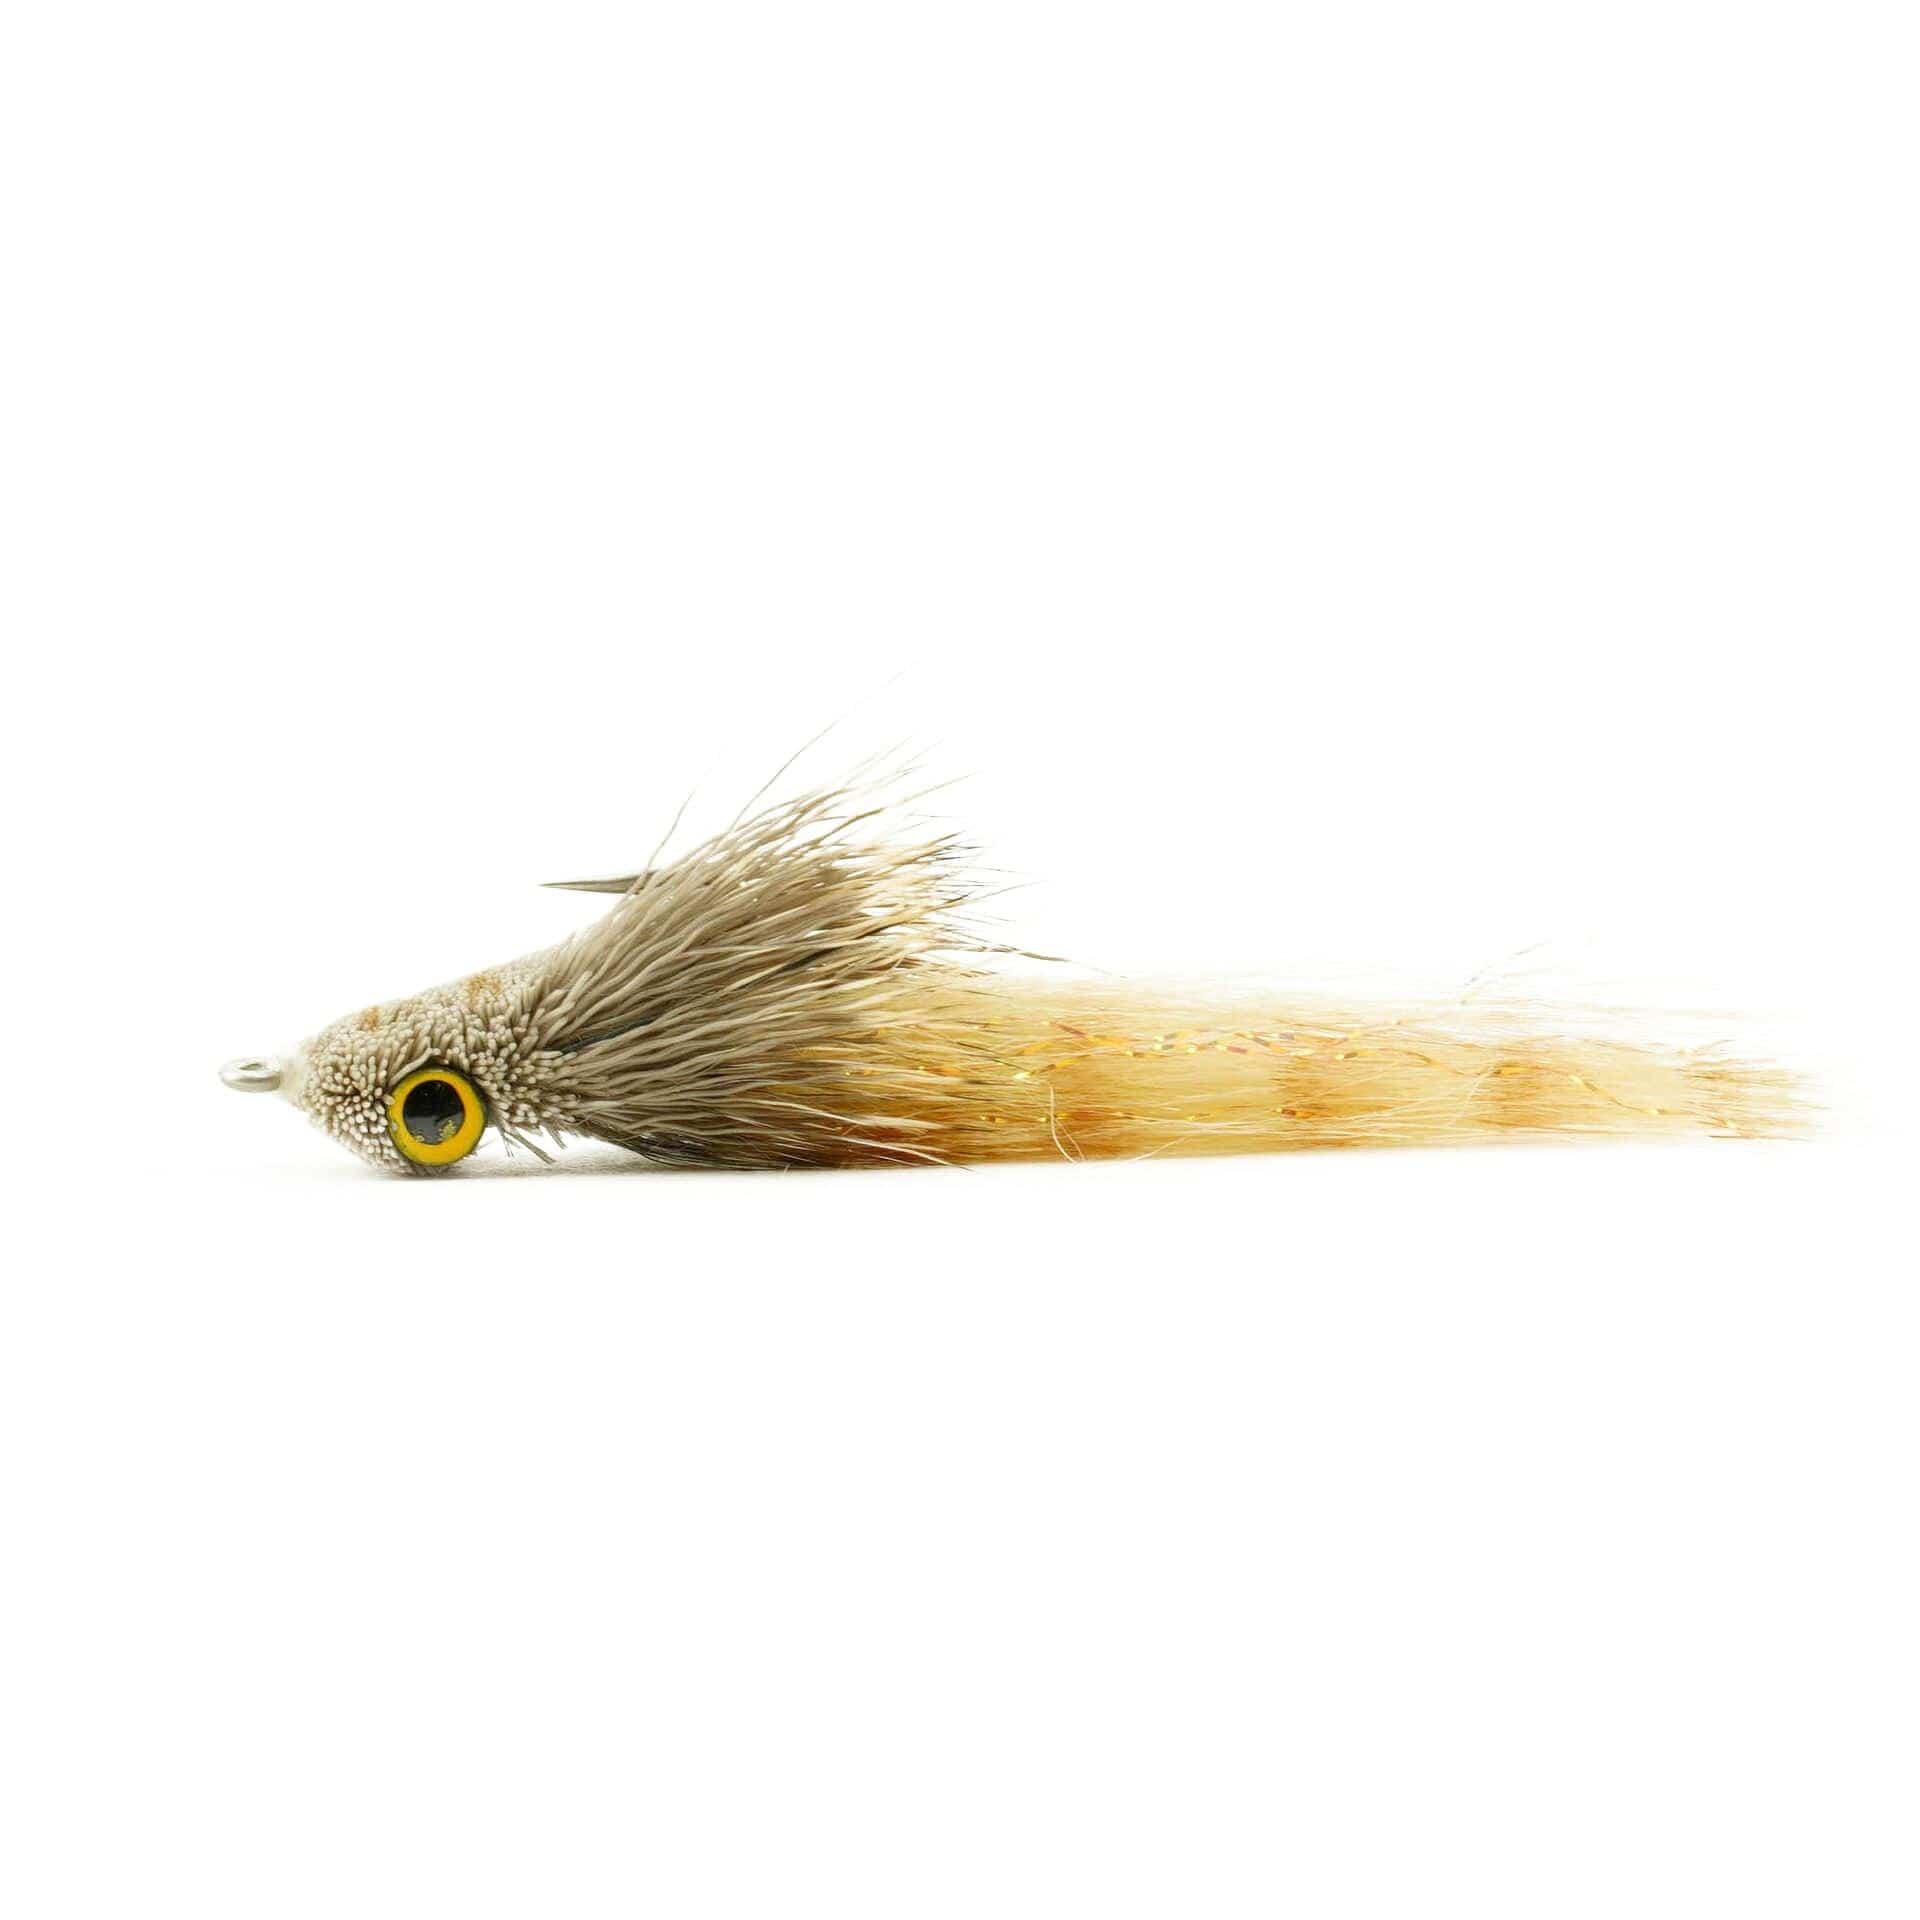 Fly Fishing Tagged saltwater fly - The Saltwater Edge